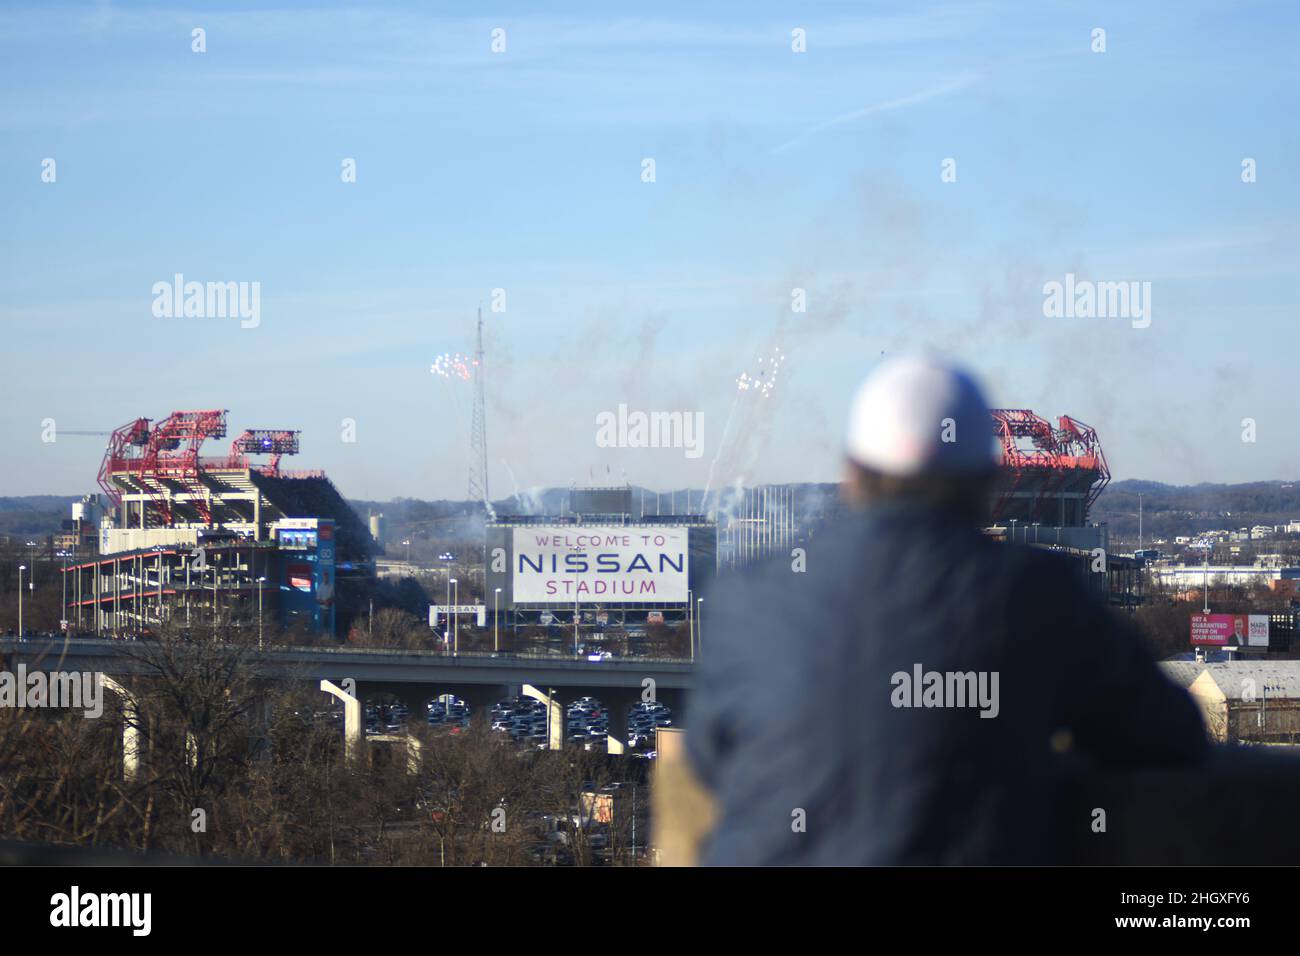 (Nashville, TN USA) January 22, 2022- Spectators gather outside of Nissan Stadium to watch the fireworks before kickoff. The Tennessee Titans take on the Cincinnati Bengals.(Camden Hall/Alamy Live News) Stock Photo